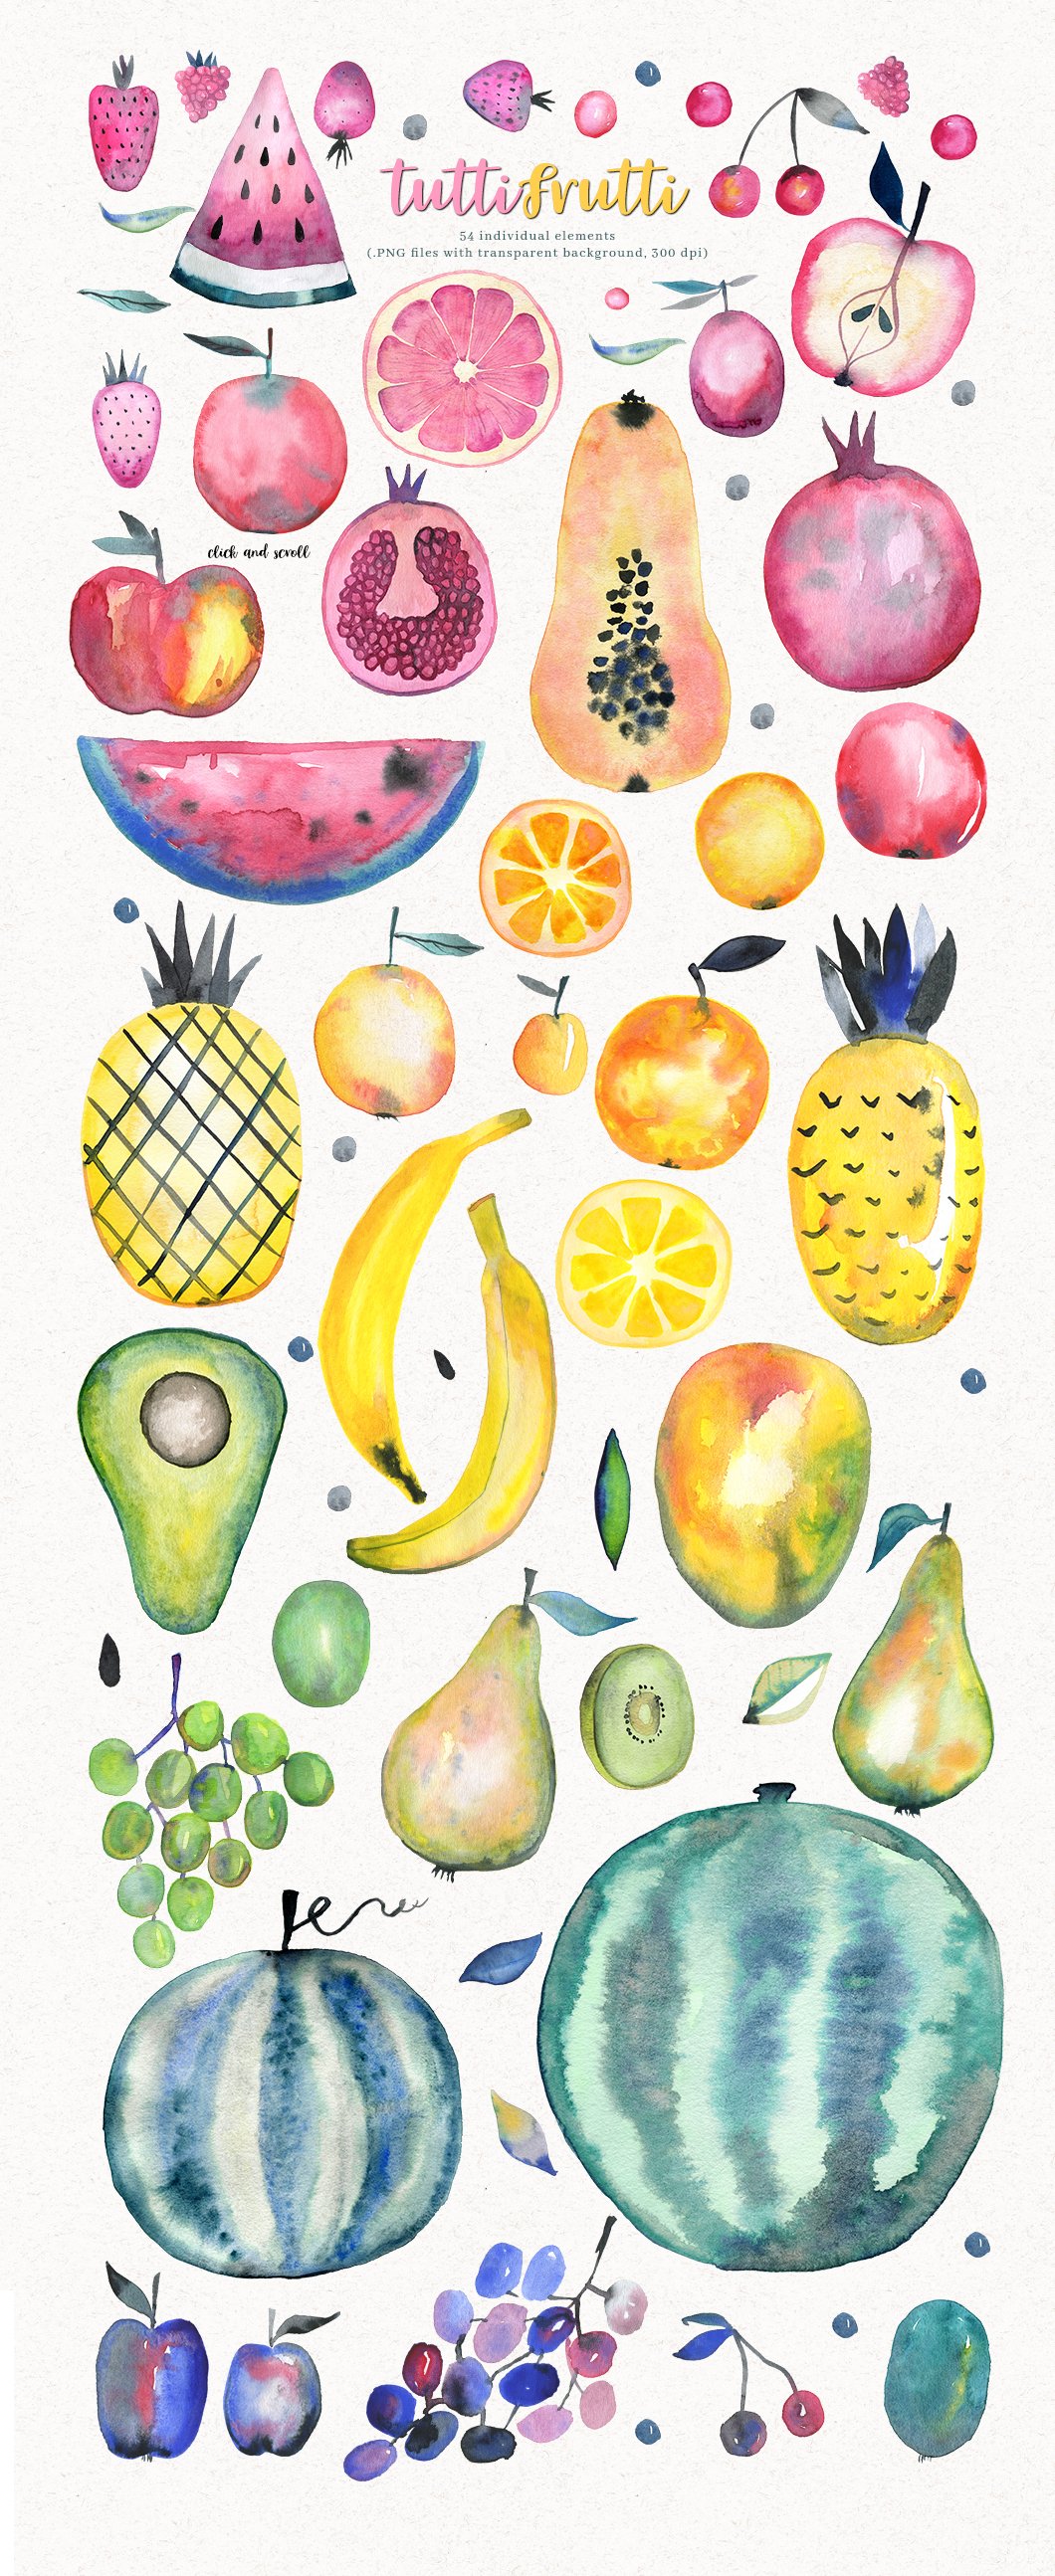 Pink-yellow lettering "Tutti Frutti" and different colorful illustrations of tutti frutti on a gray background.